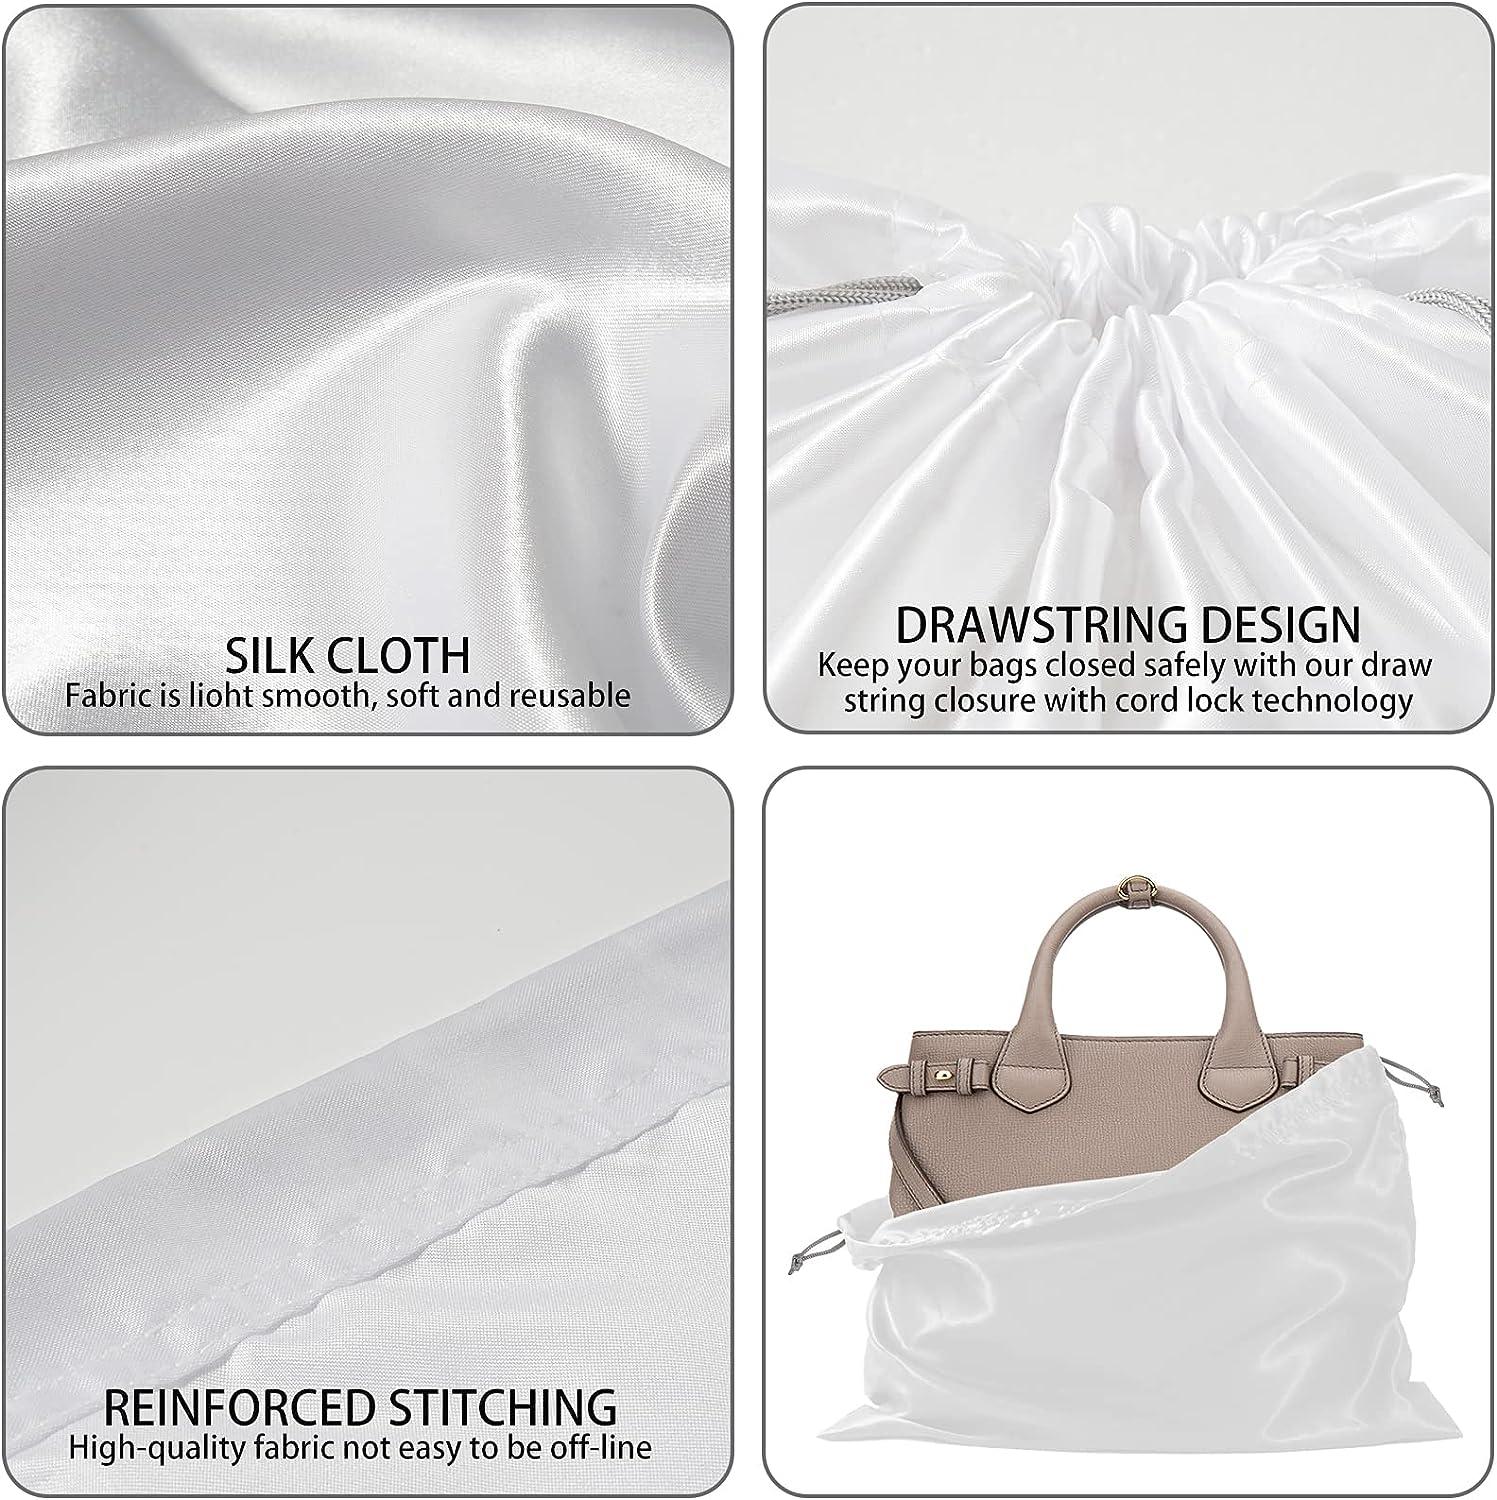 HAMBOLY Satin Bags 10 Pack Dust Cover Storage Pouch with Drawstring Closure  for Packaging Handbags Purses Pocketbooks Shoes Boots, White (19 x 15 in)